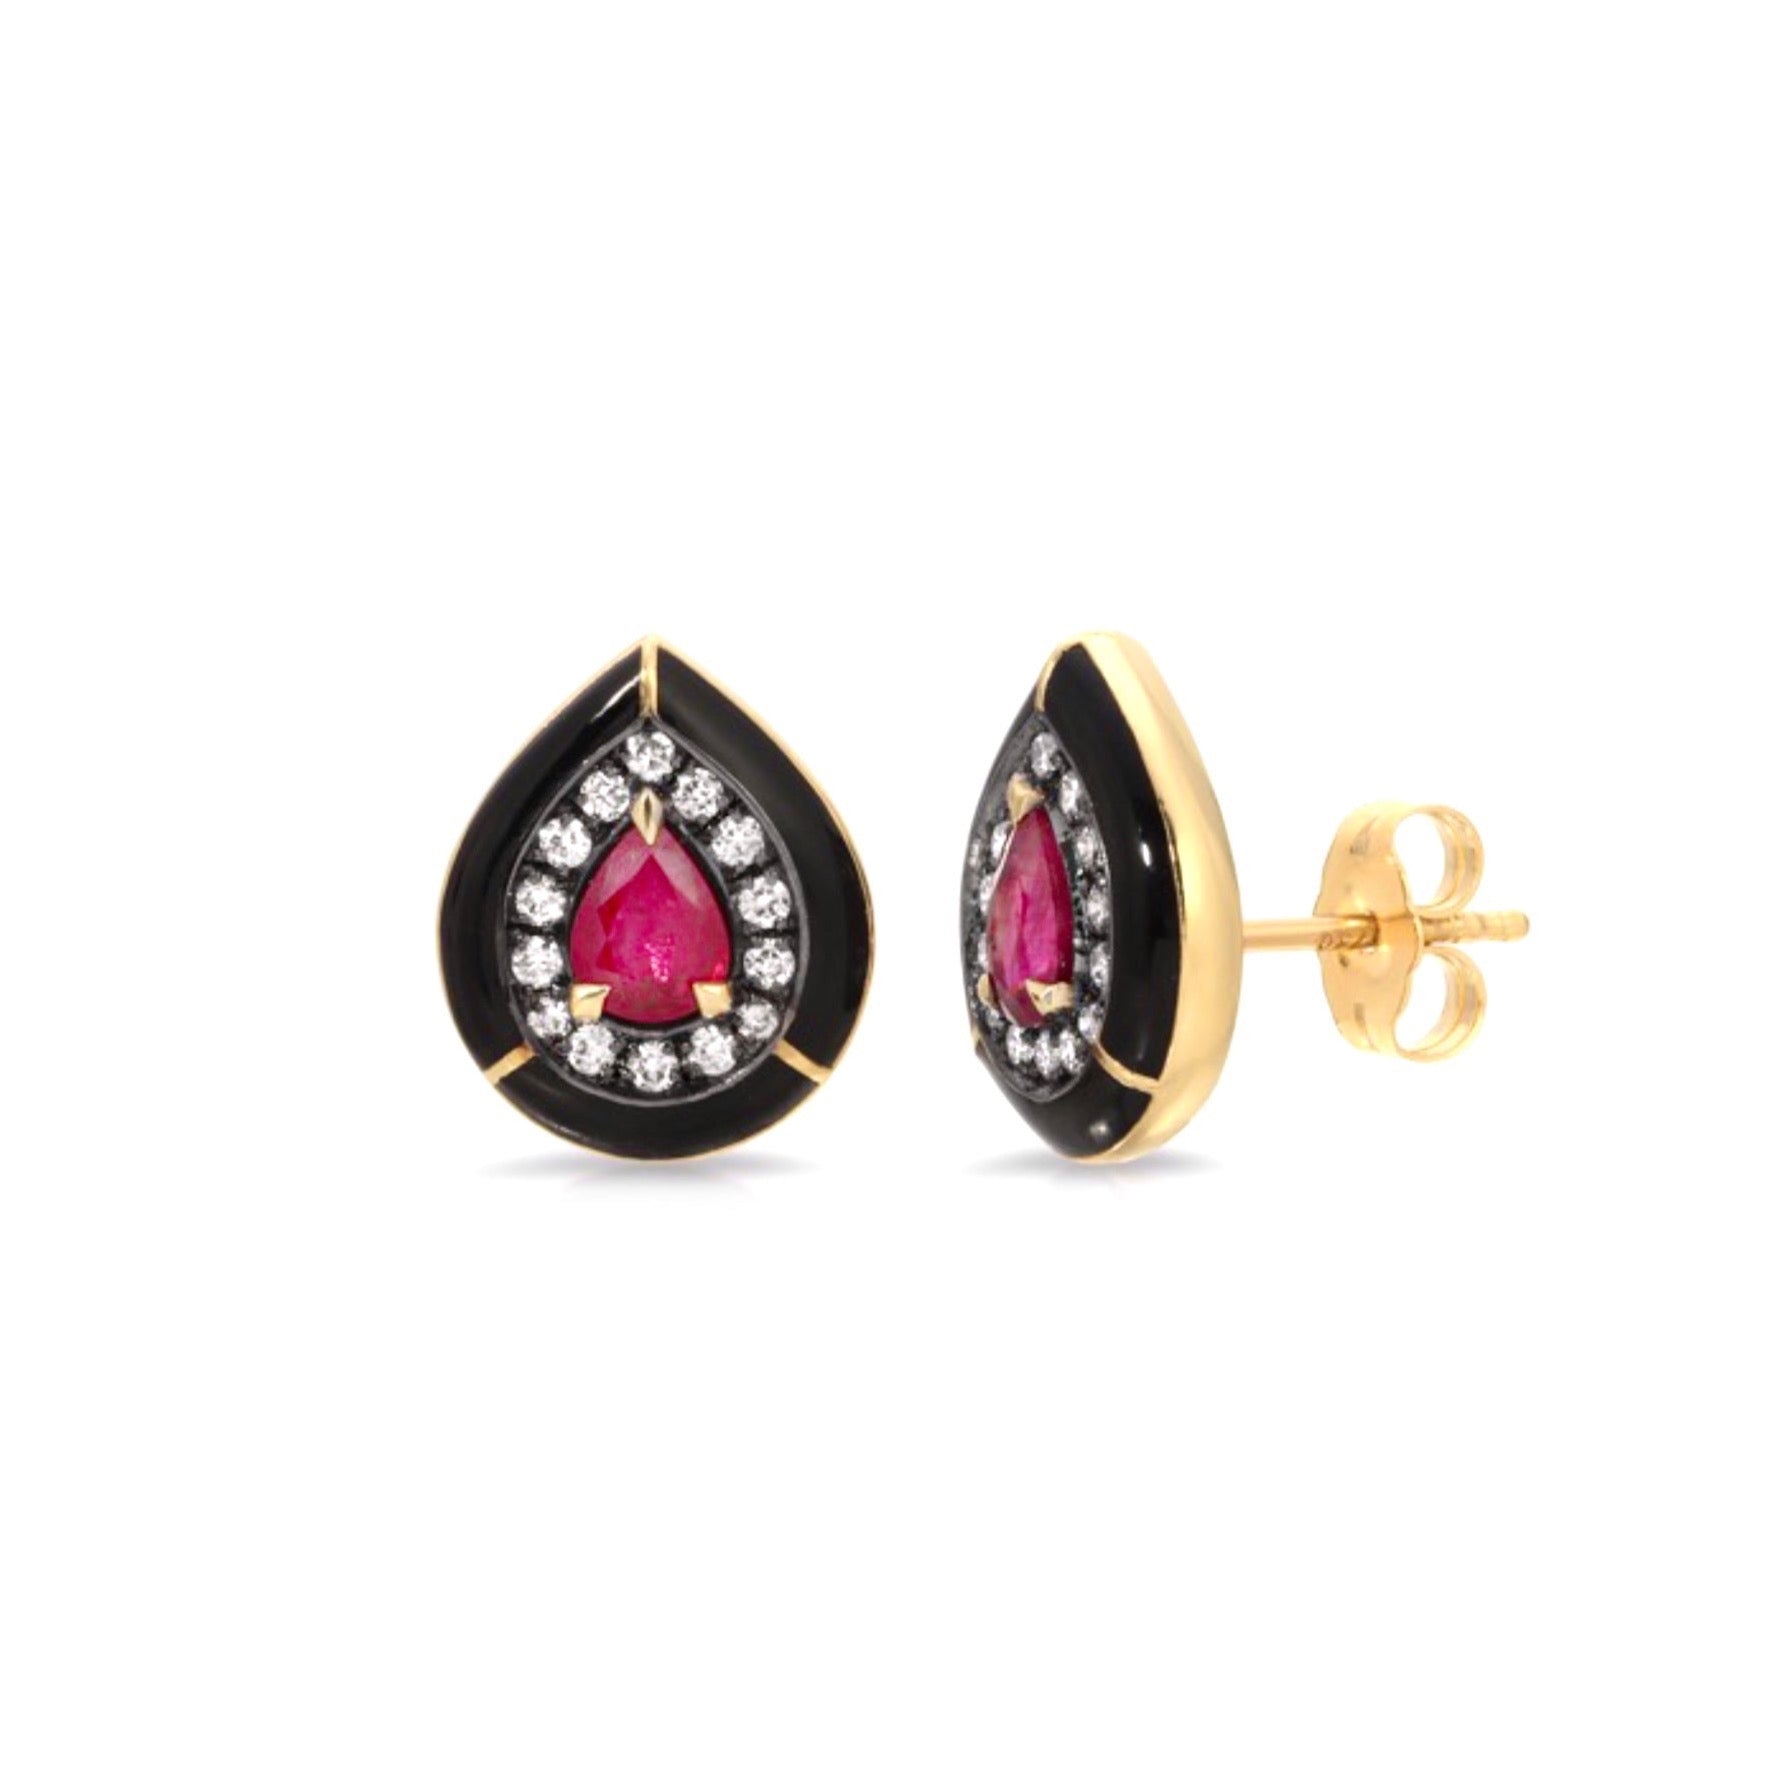 Ruby & Enamel Stud Earrings by Lord Jewelry available at Talisman Collection Fine Jewelers in El Dorado Hills, CA and online. Simultaneously edgy and elegant, these exquisite ruby & enamel stud earrings make a chic statement. Featuring 0.70 cts of pear-cut rubies surrounded by 0.20 cts of diamonds and black enamel set in 18k, they are the epitome of luxury and sophistication. Perfect for both everyday wear and special occasions!